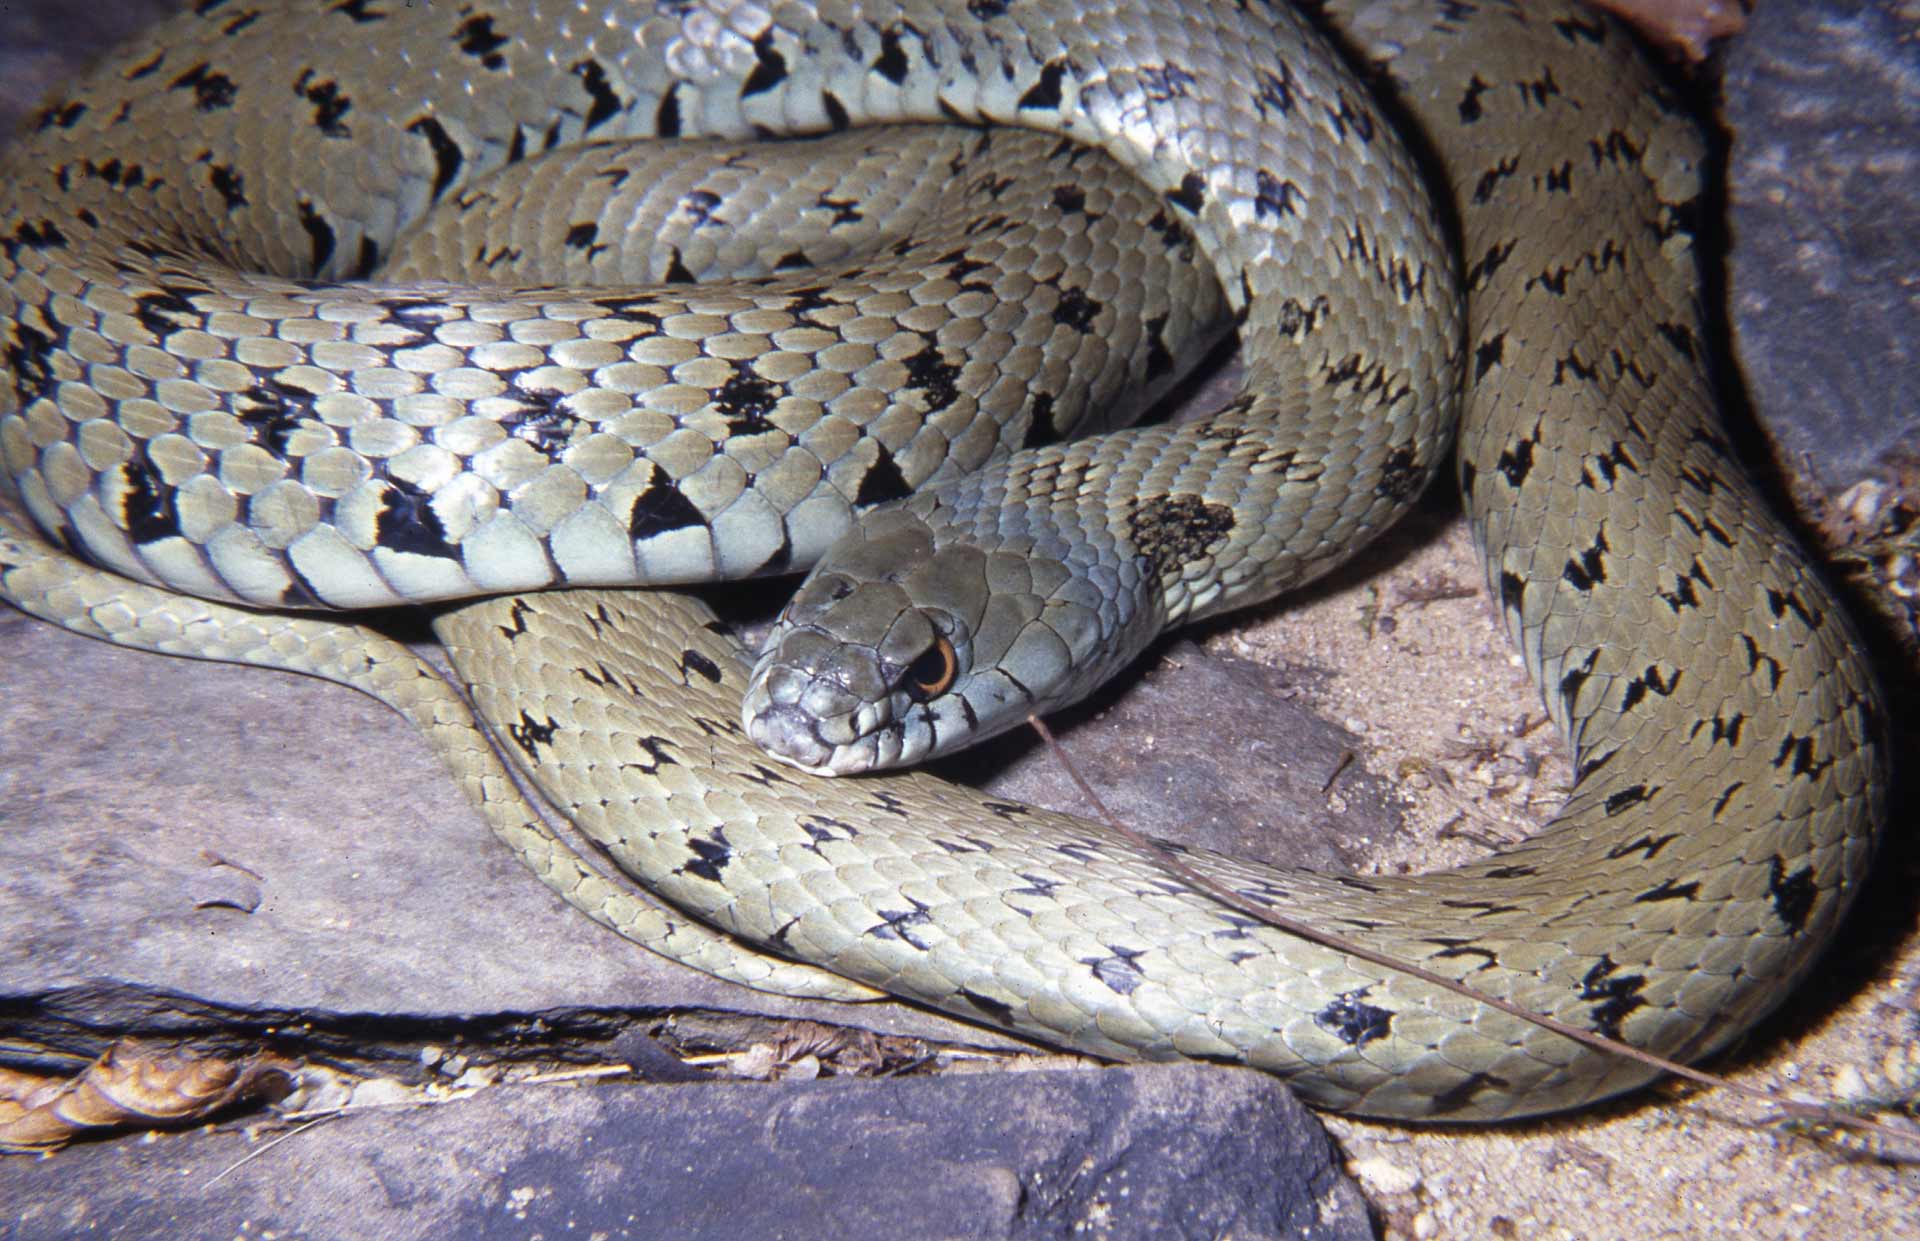 Iberian Grass Snake: Cryptic New Species of Snake Identified ...